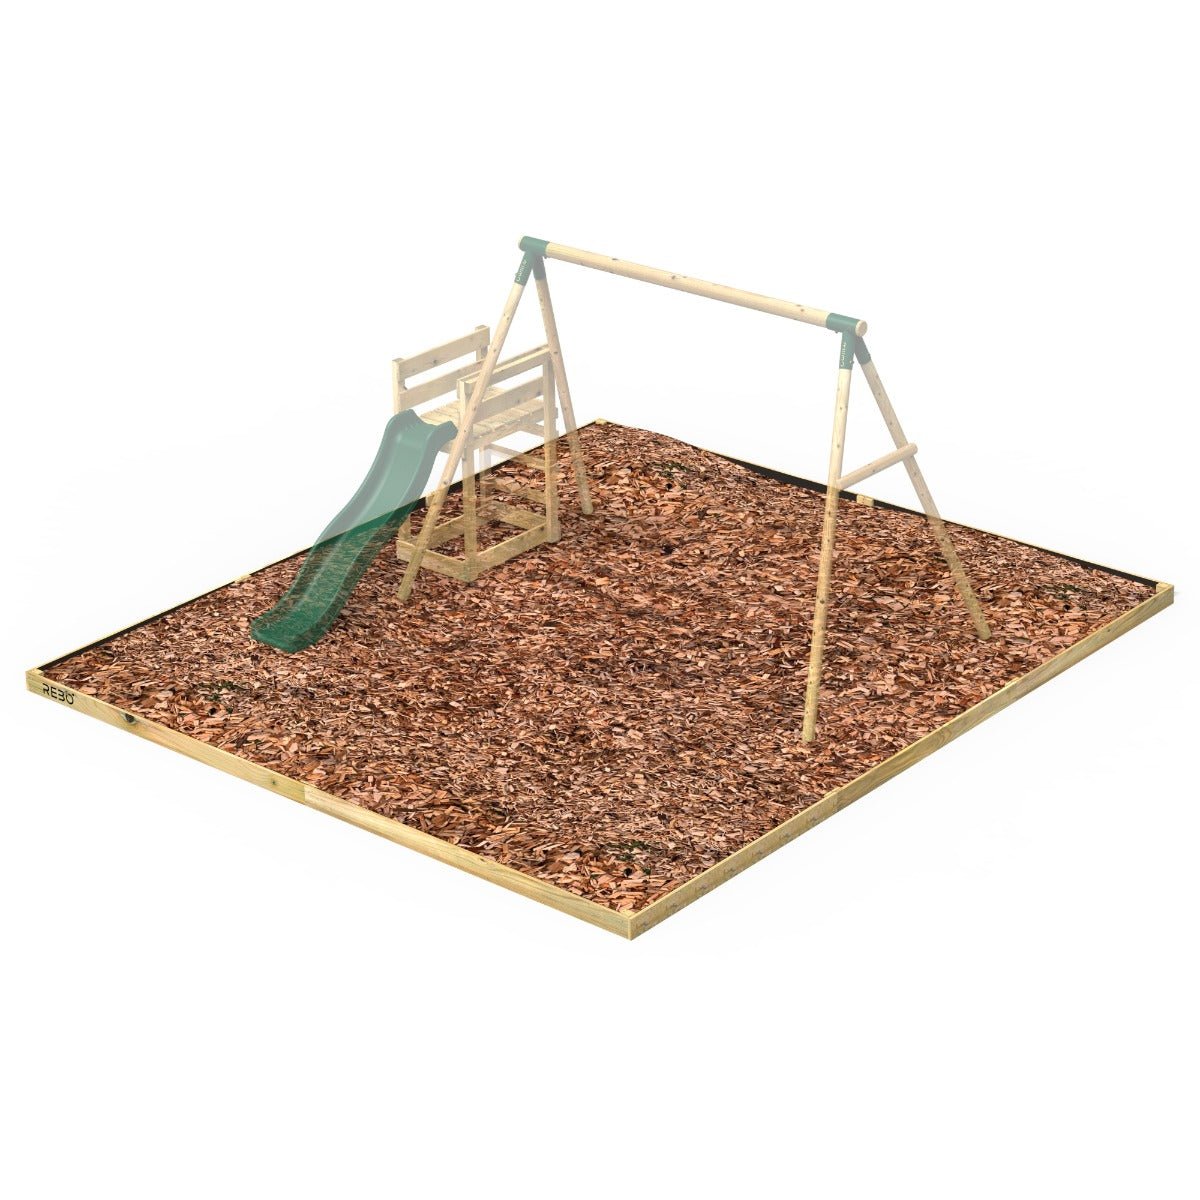 Rebo Safety Play Area Protective Bark Wood Chip Kit - 4.5M x 5.1M